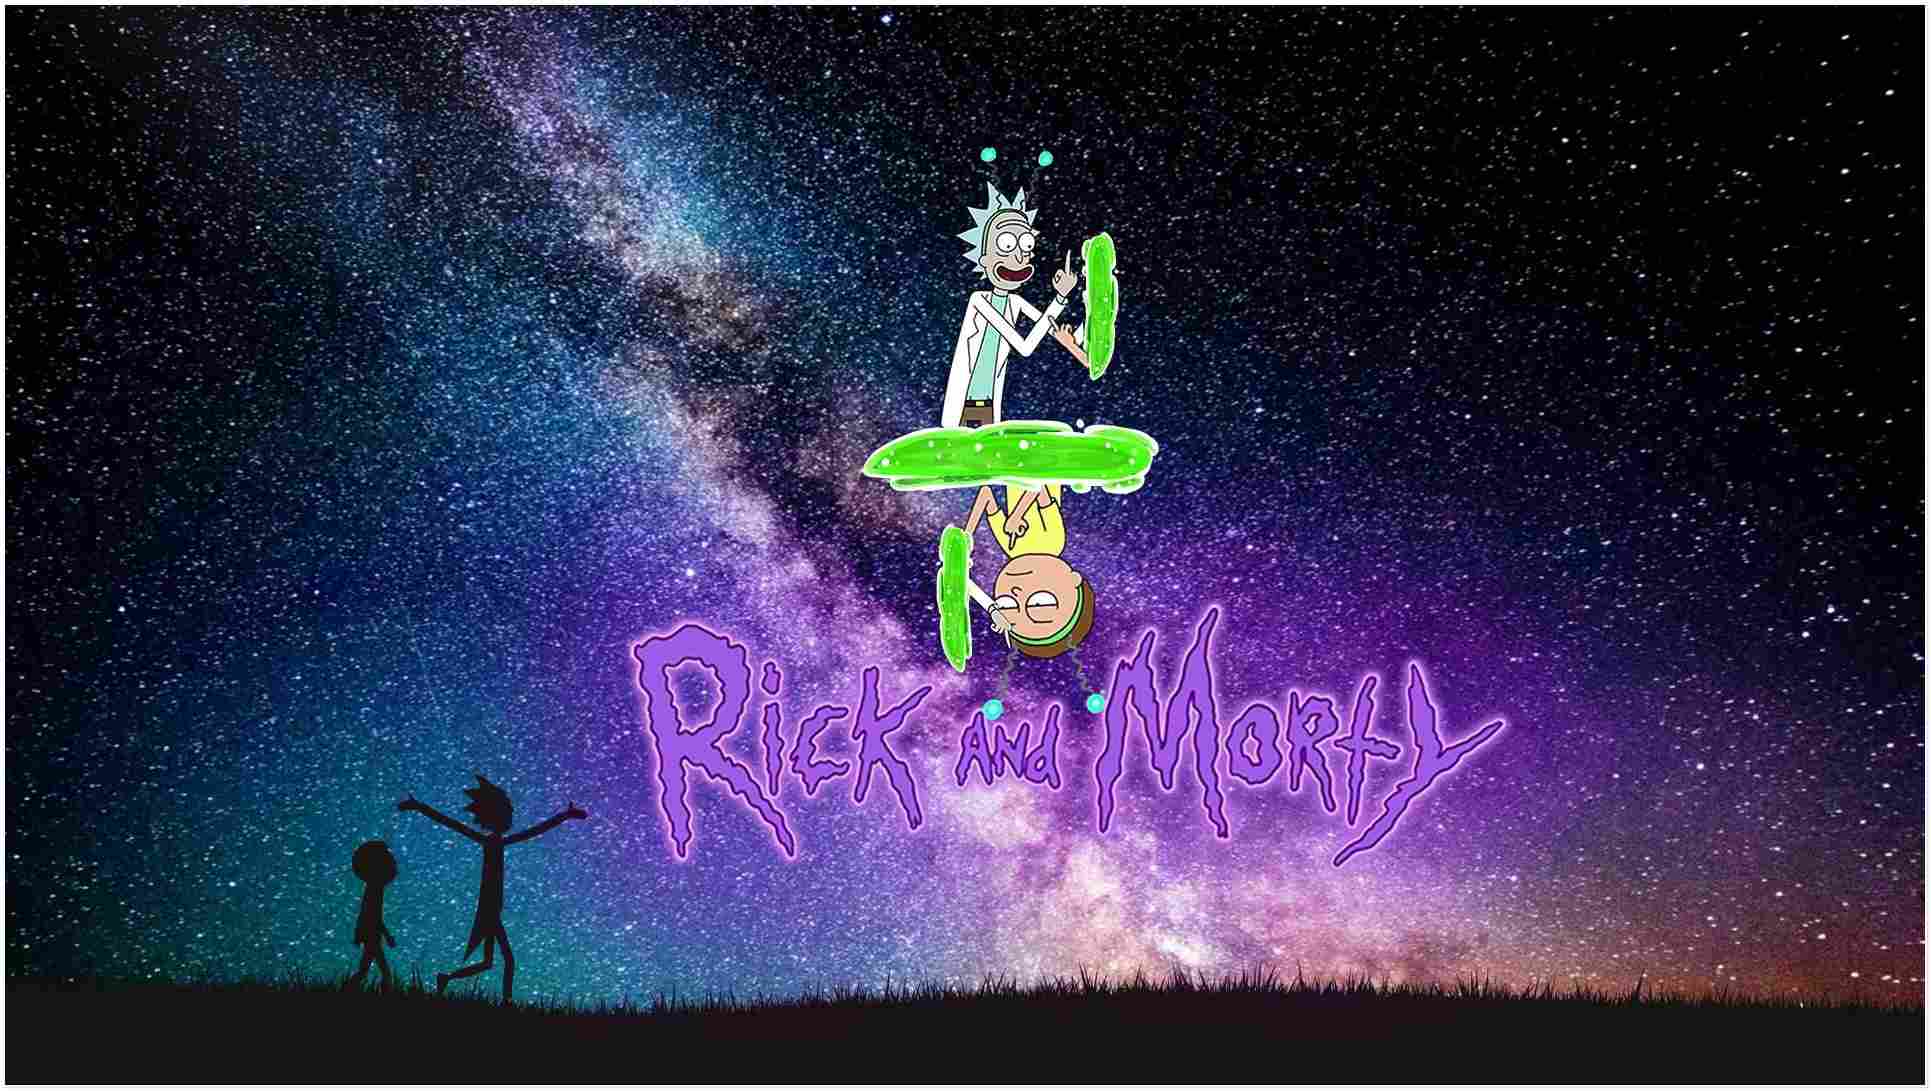 rick and morty HD wallpaper latest Update Wallpaper Wise